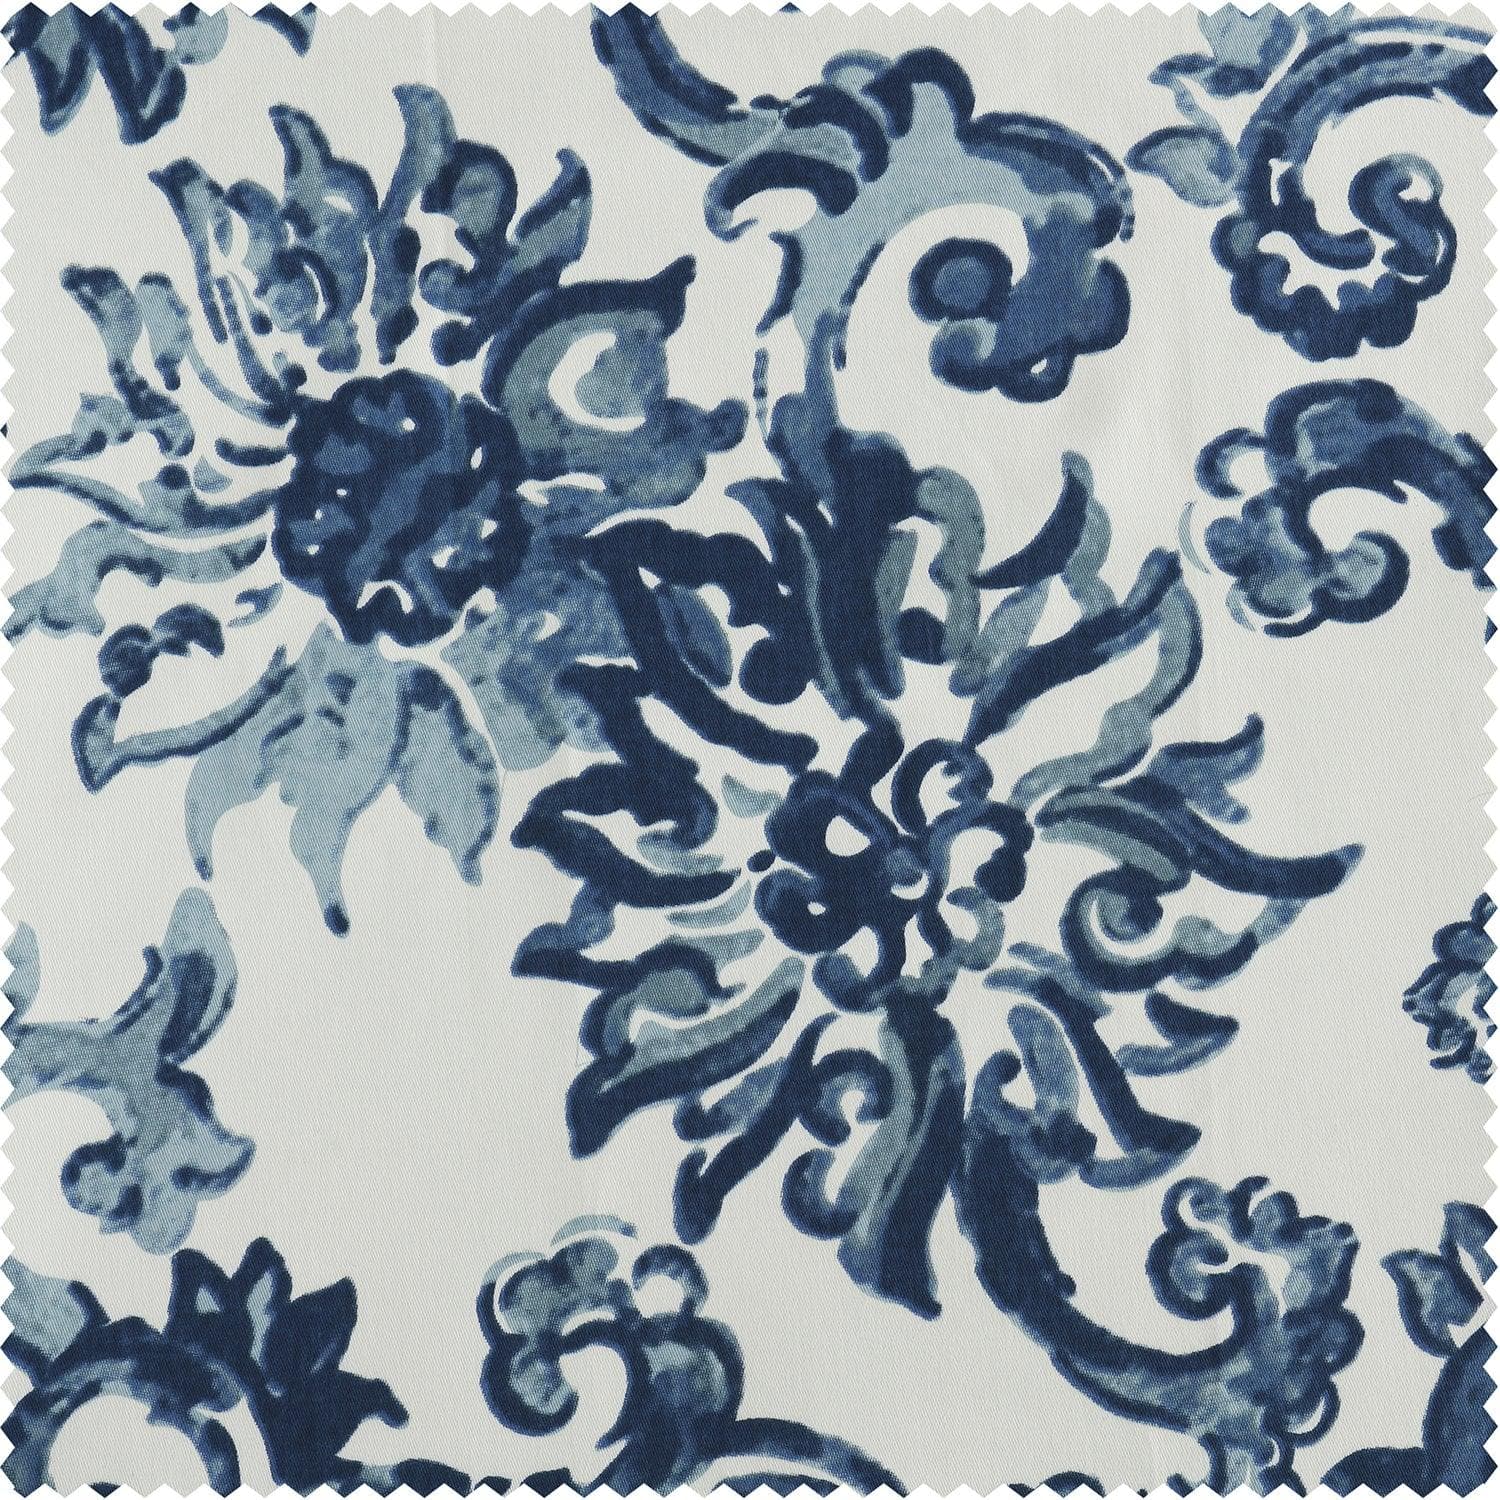 Indonesian Blue Floral Printed Cotton Window Valance